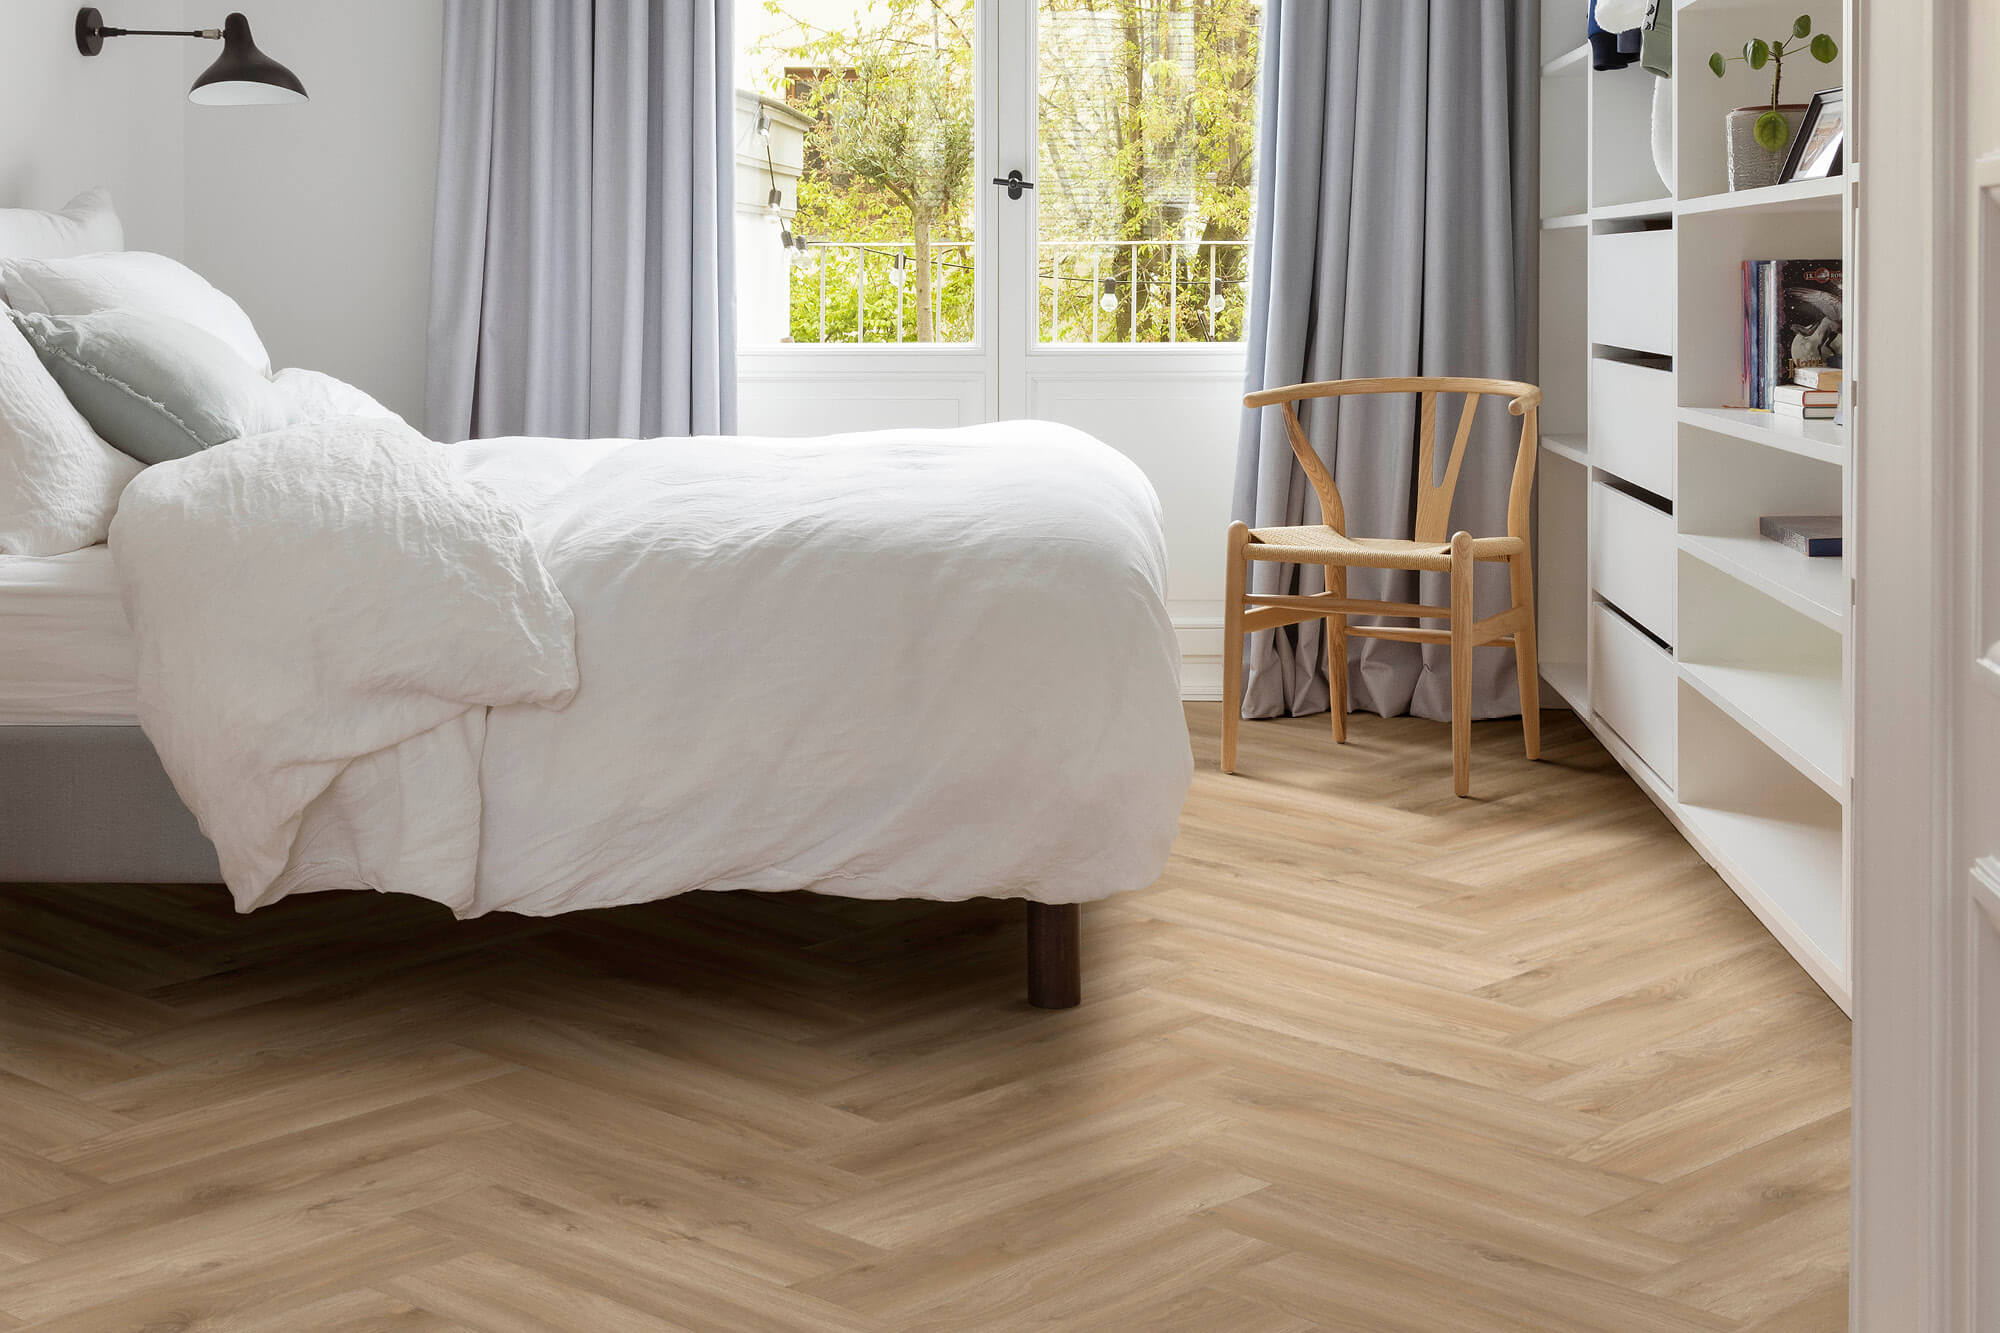 Moduleo LayRed Luxury vinyl flooring collection - Ideal for renovation and easy to install - Herringbone Sierra Oak 58847